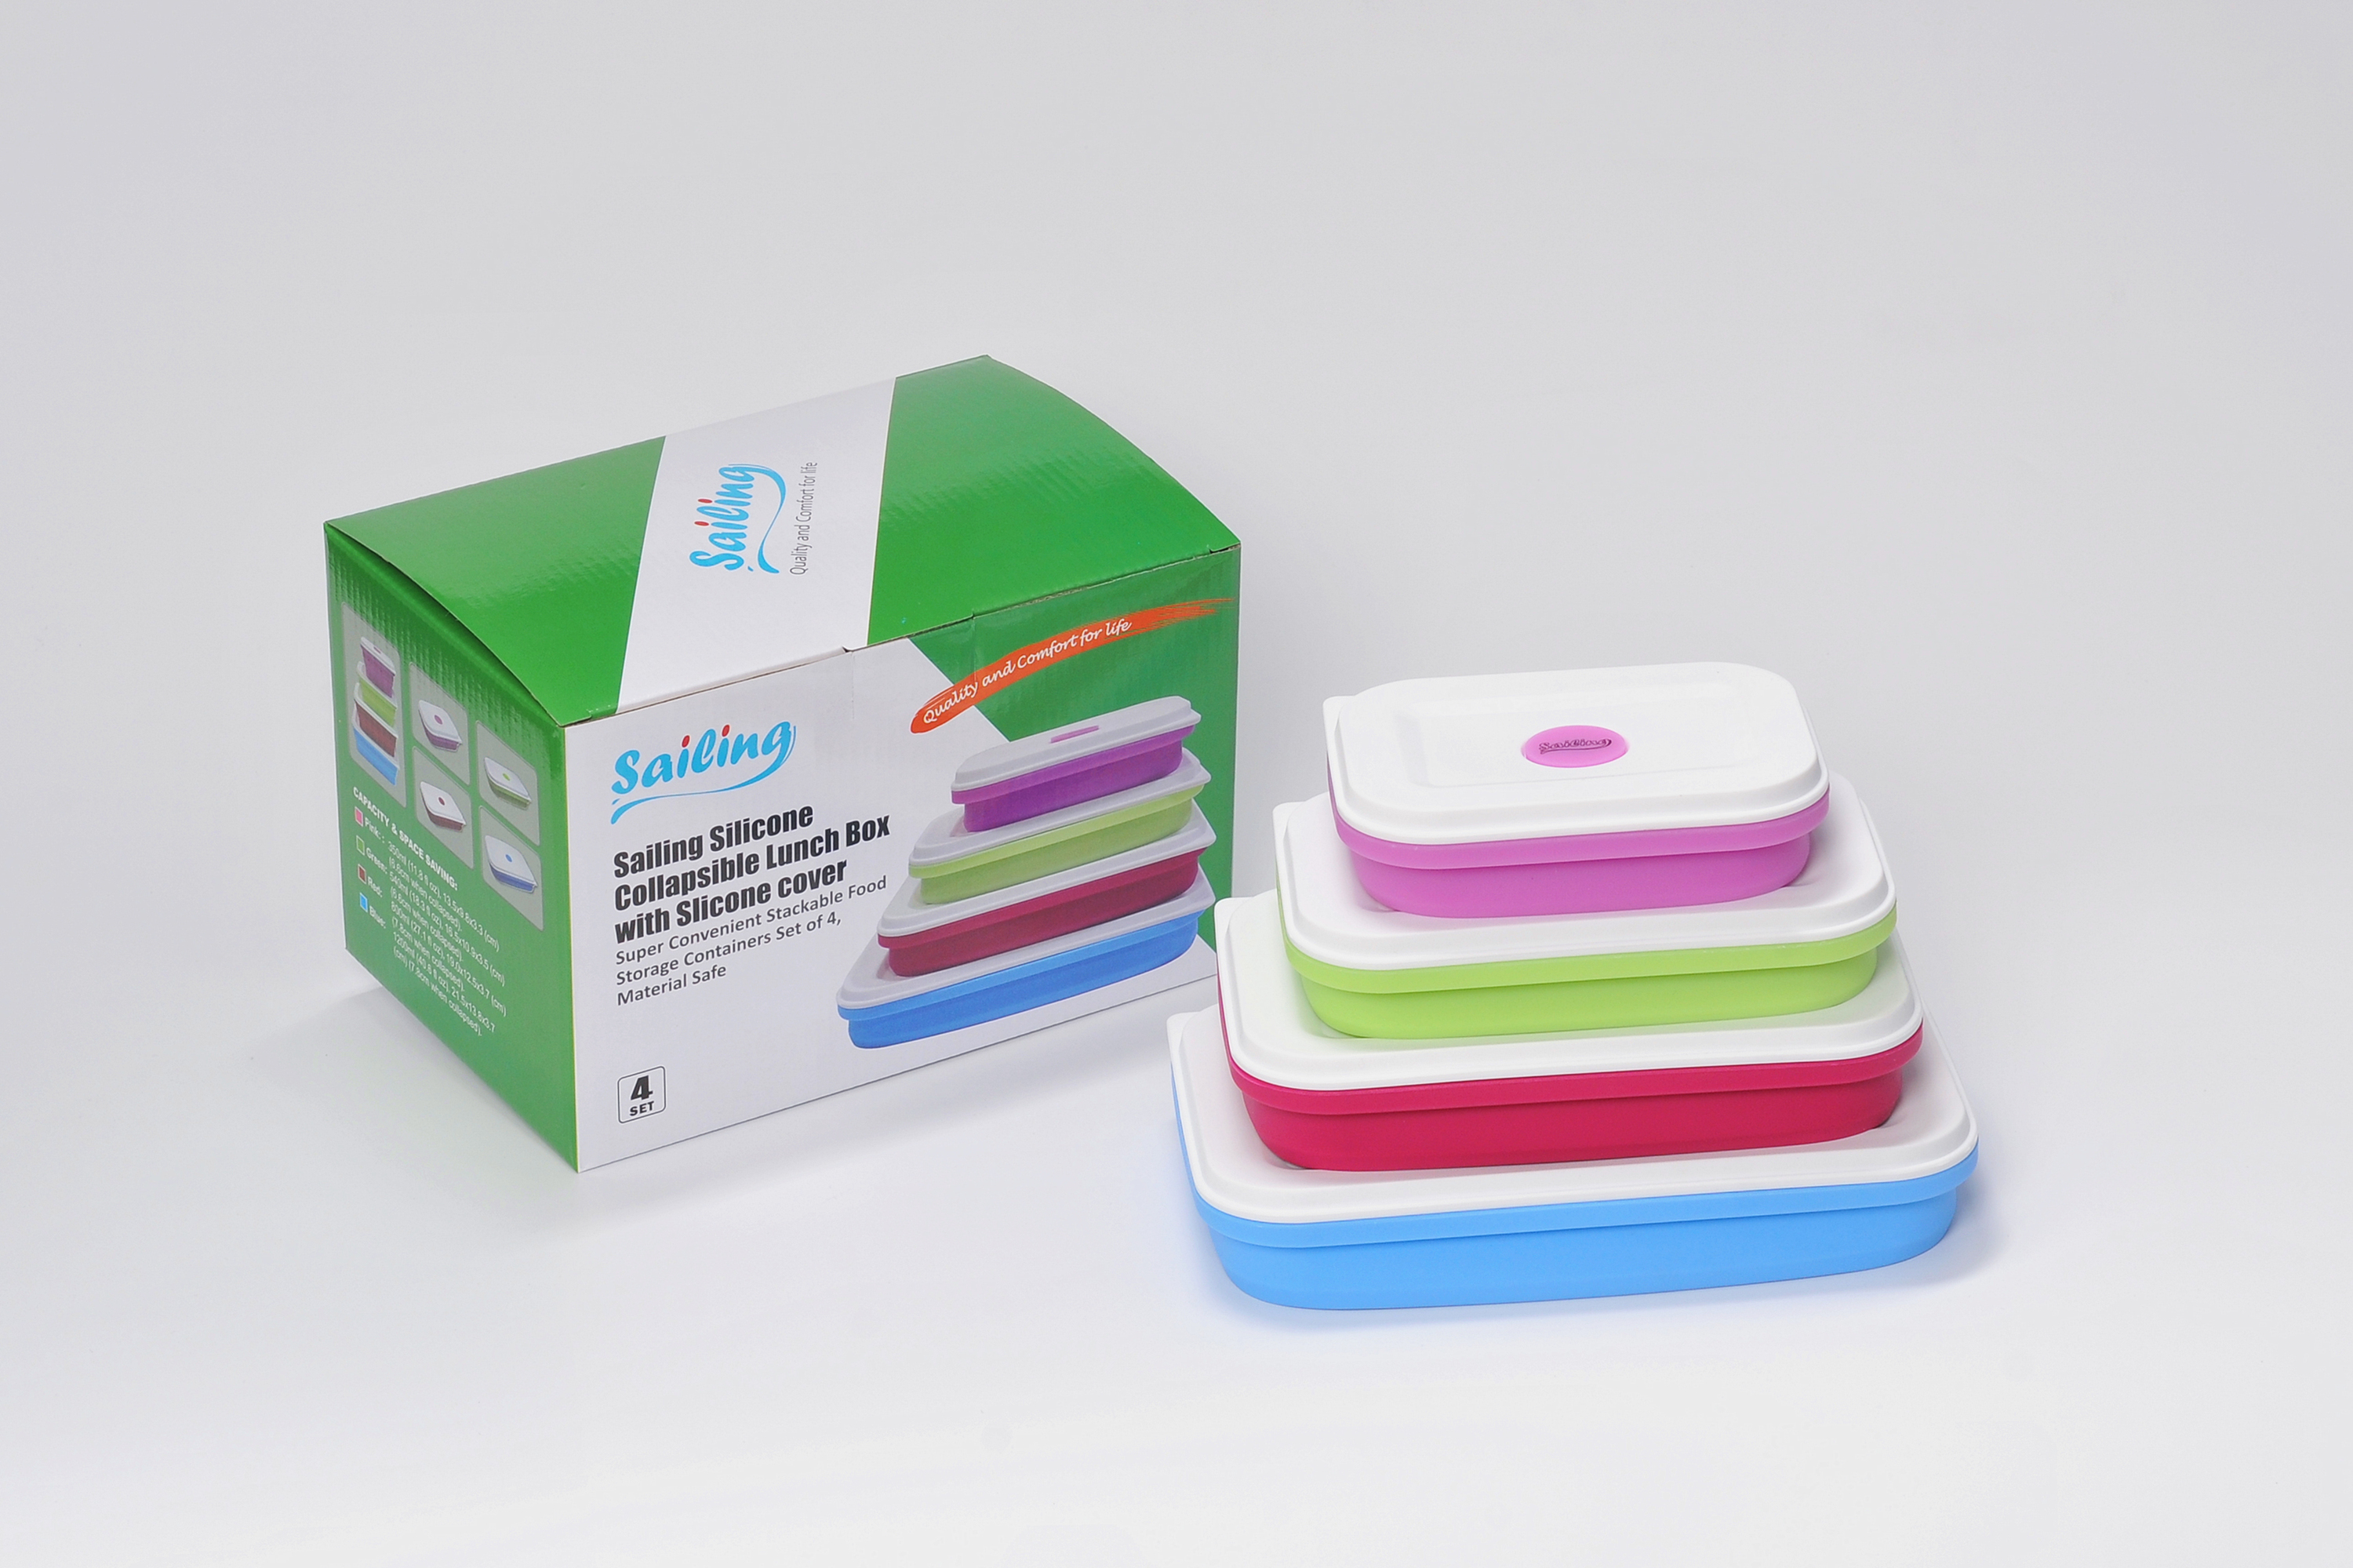 Sailing Premium Collapsible Silicone Lunch Box/Food Storage Container (with Silicone cover)